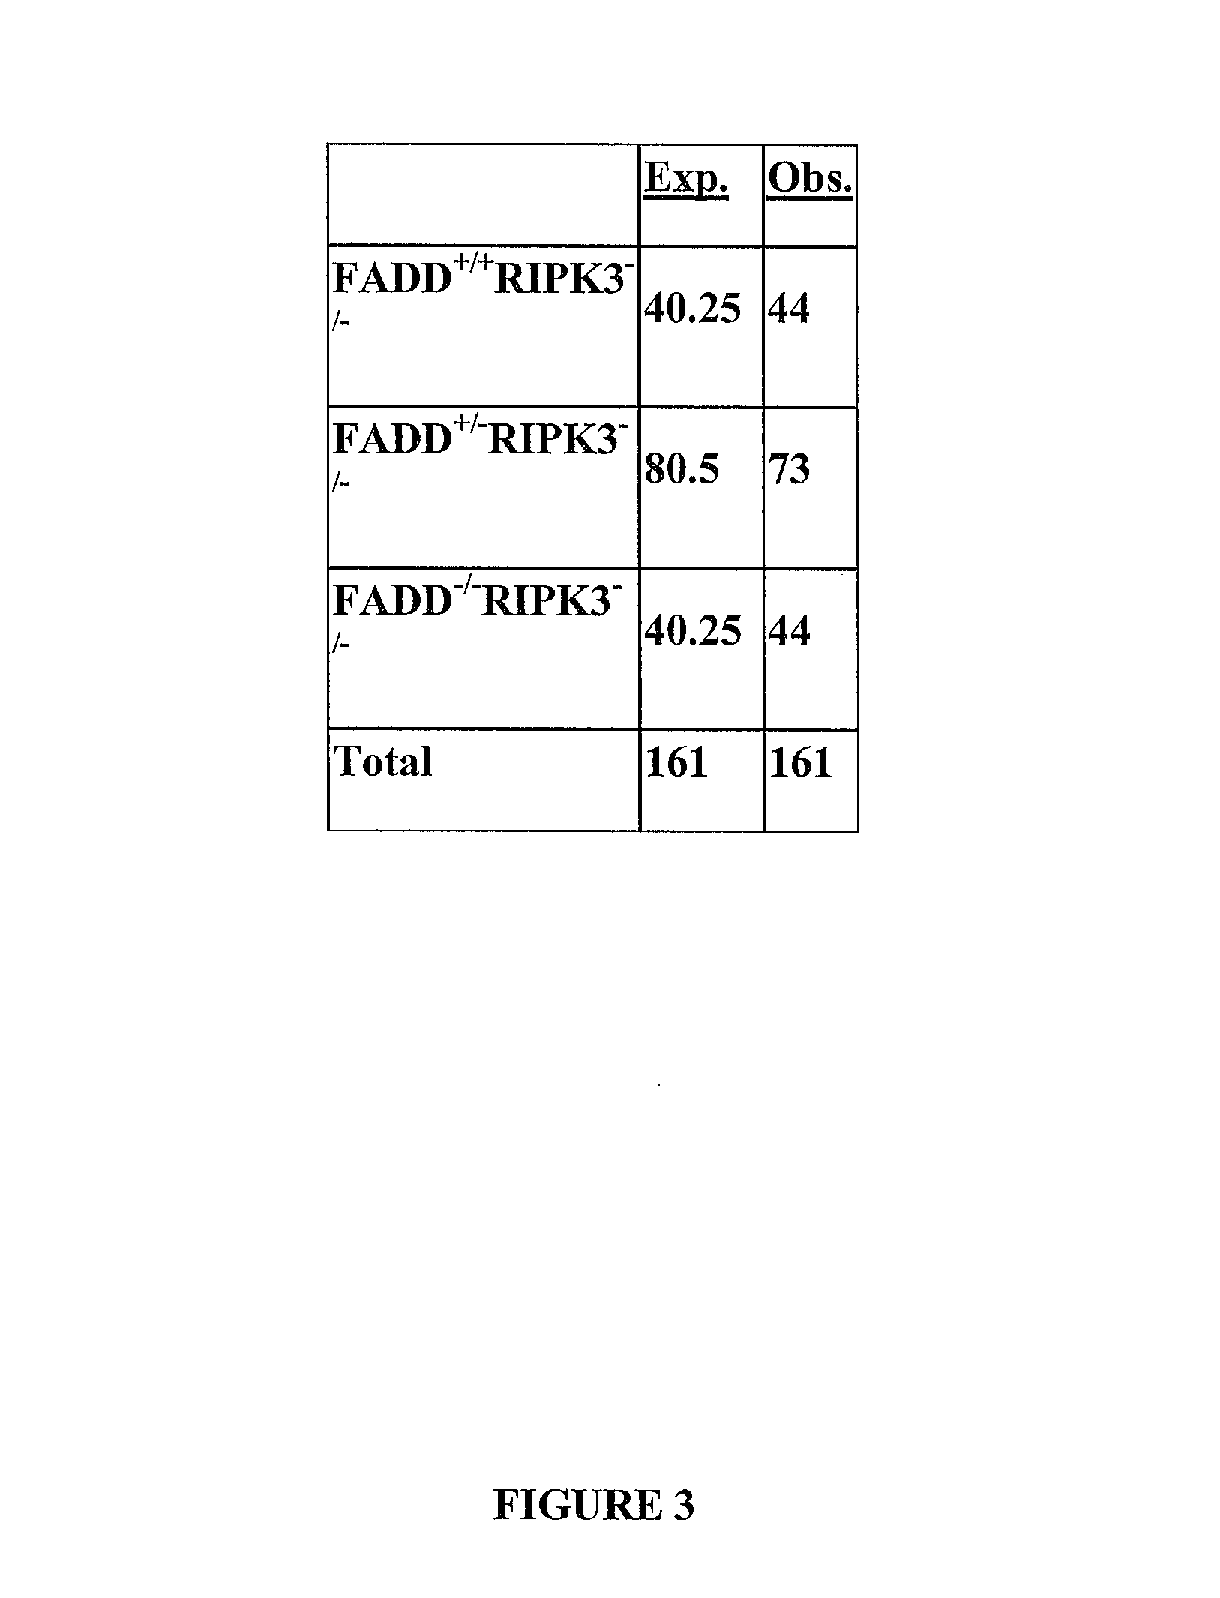 Truncated Constructs of RIPK3 and Related Uses